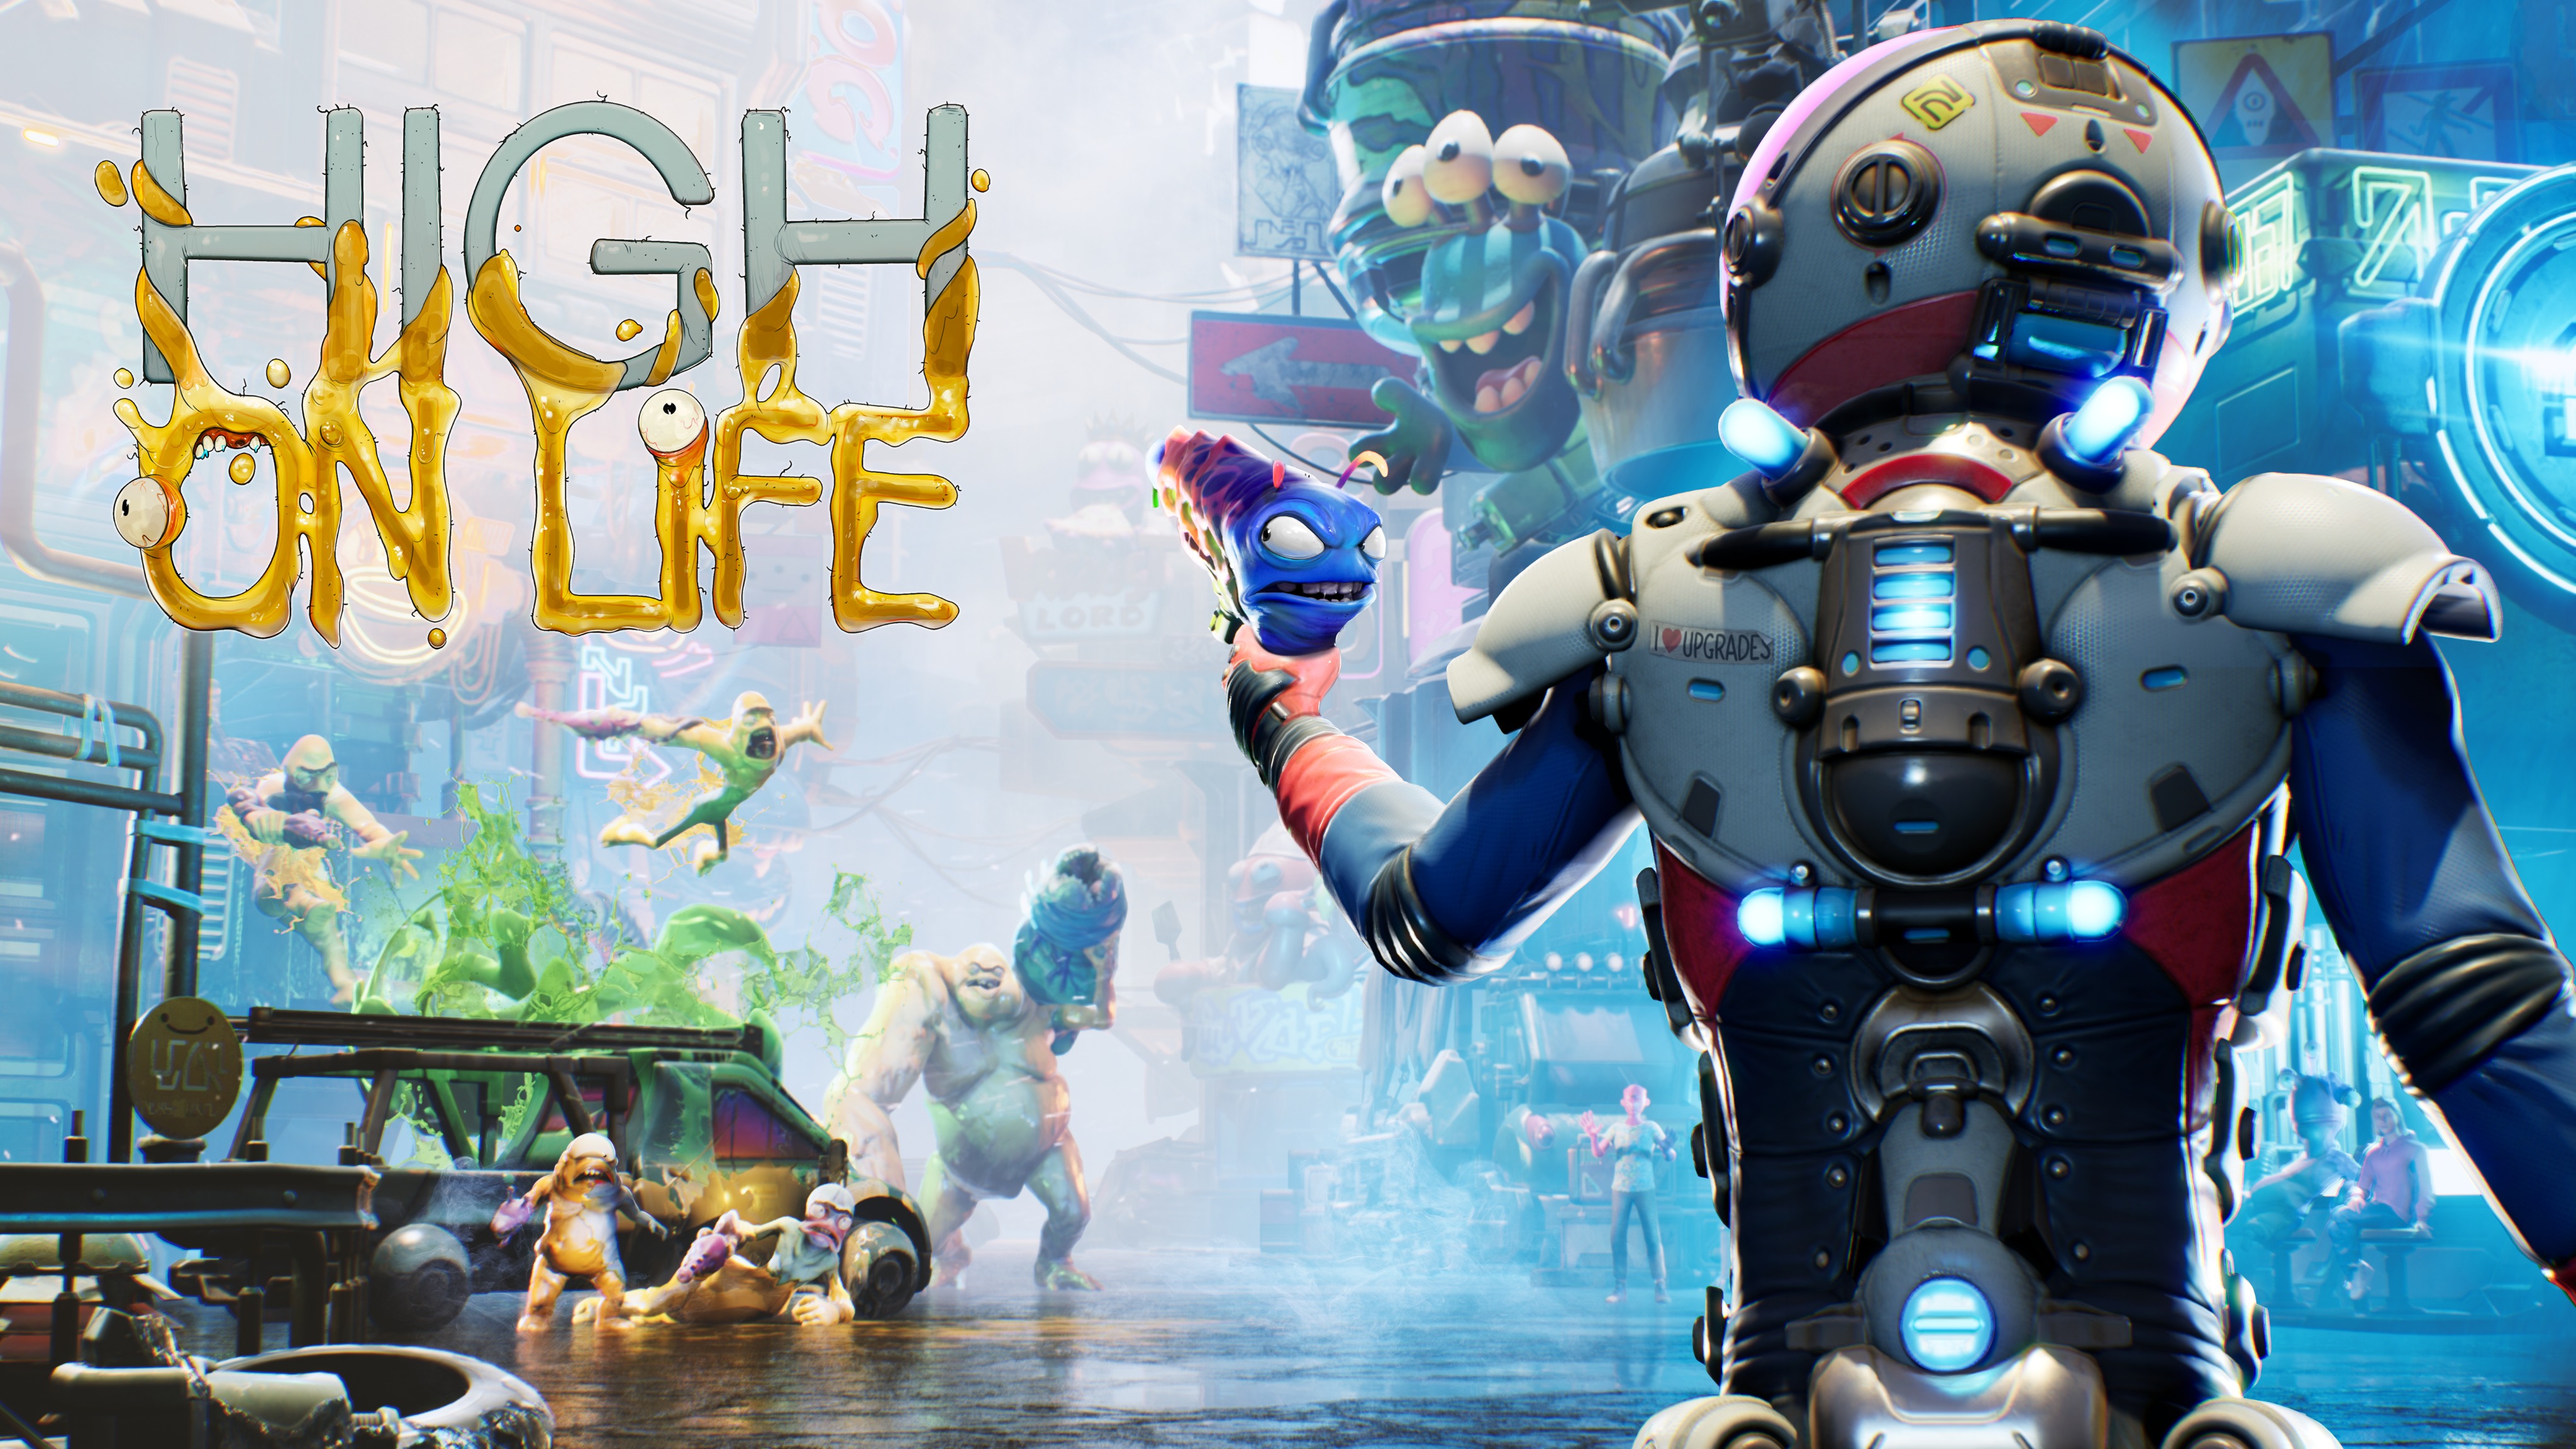 high on life game release date - High On Life - TapTap